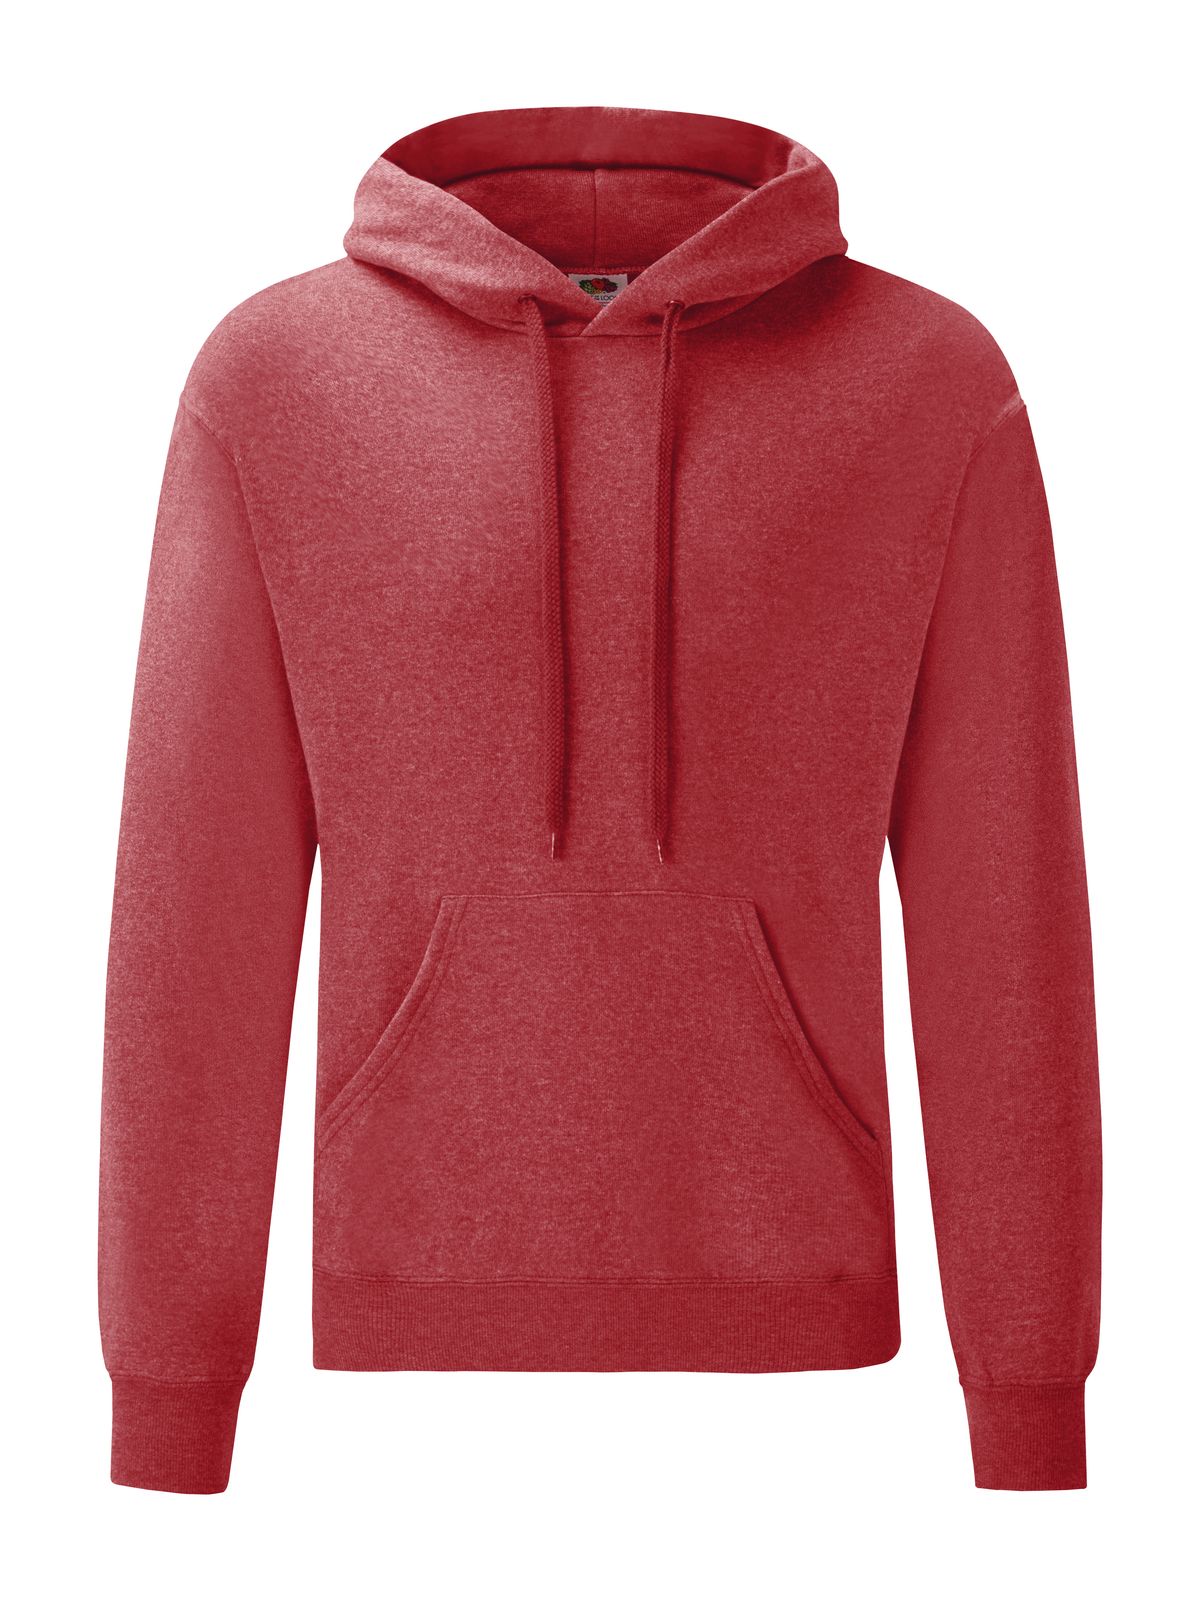 classic-hooded-sweat-vintage-heather-red.webp